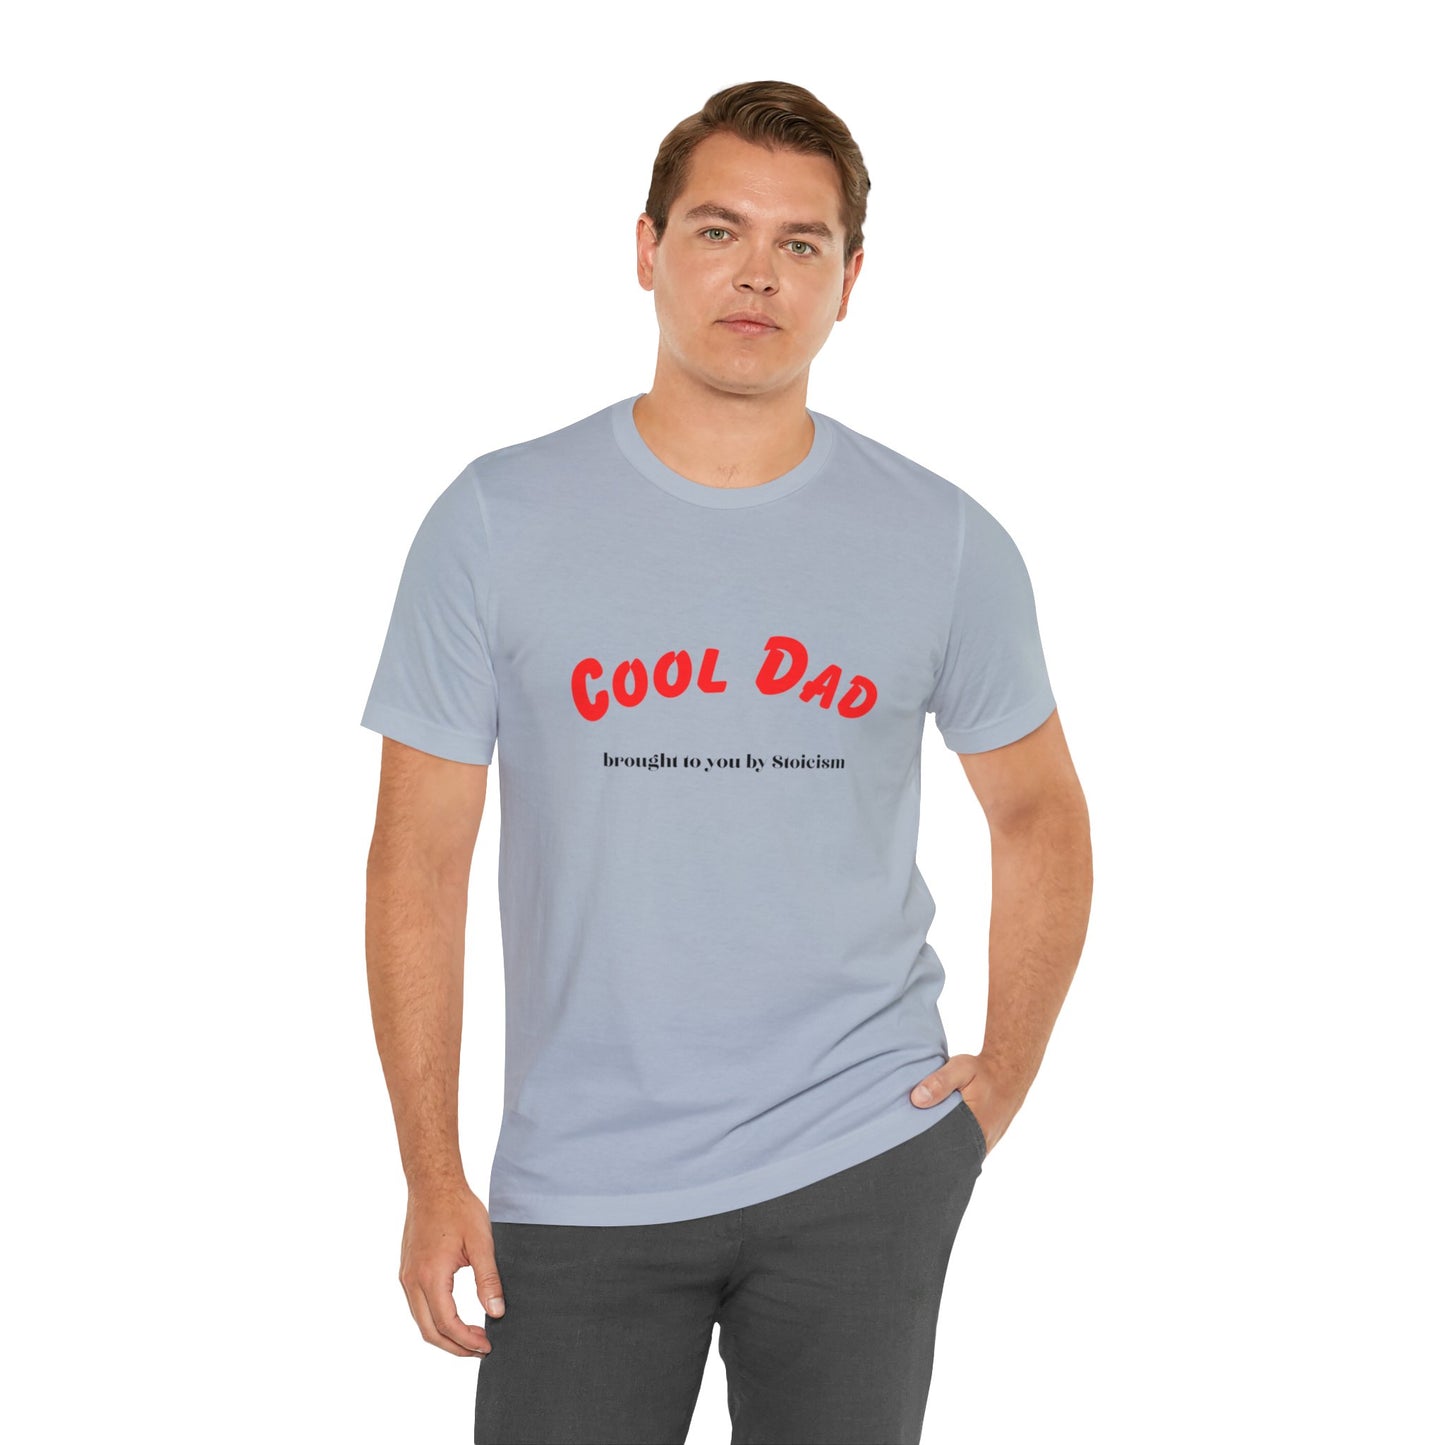 Cool Dad - brought to you by Stoicism Unisex Jersey Short Sleeve Tee